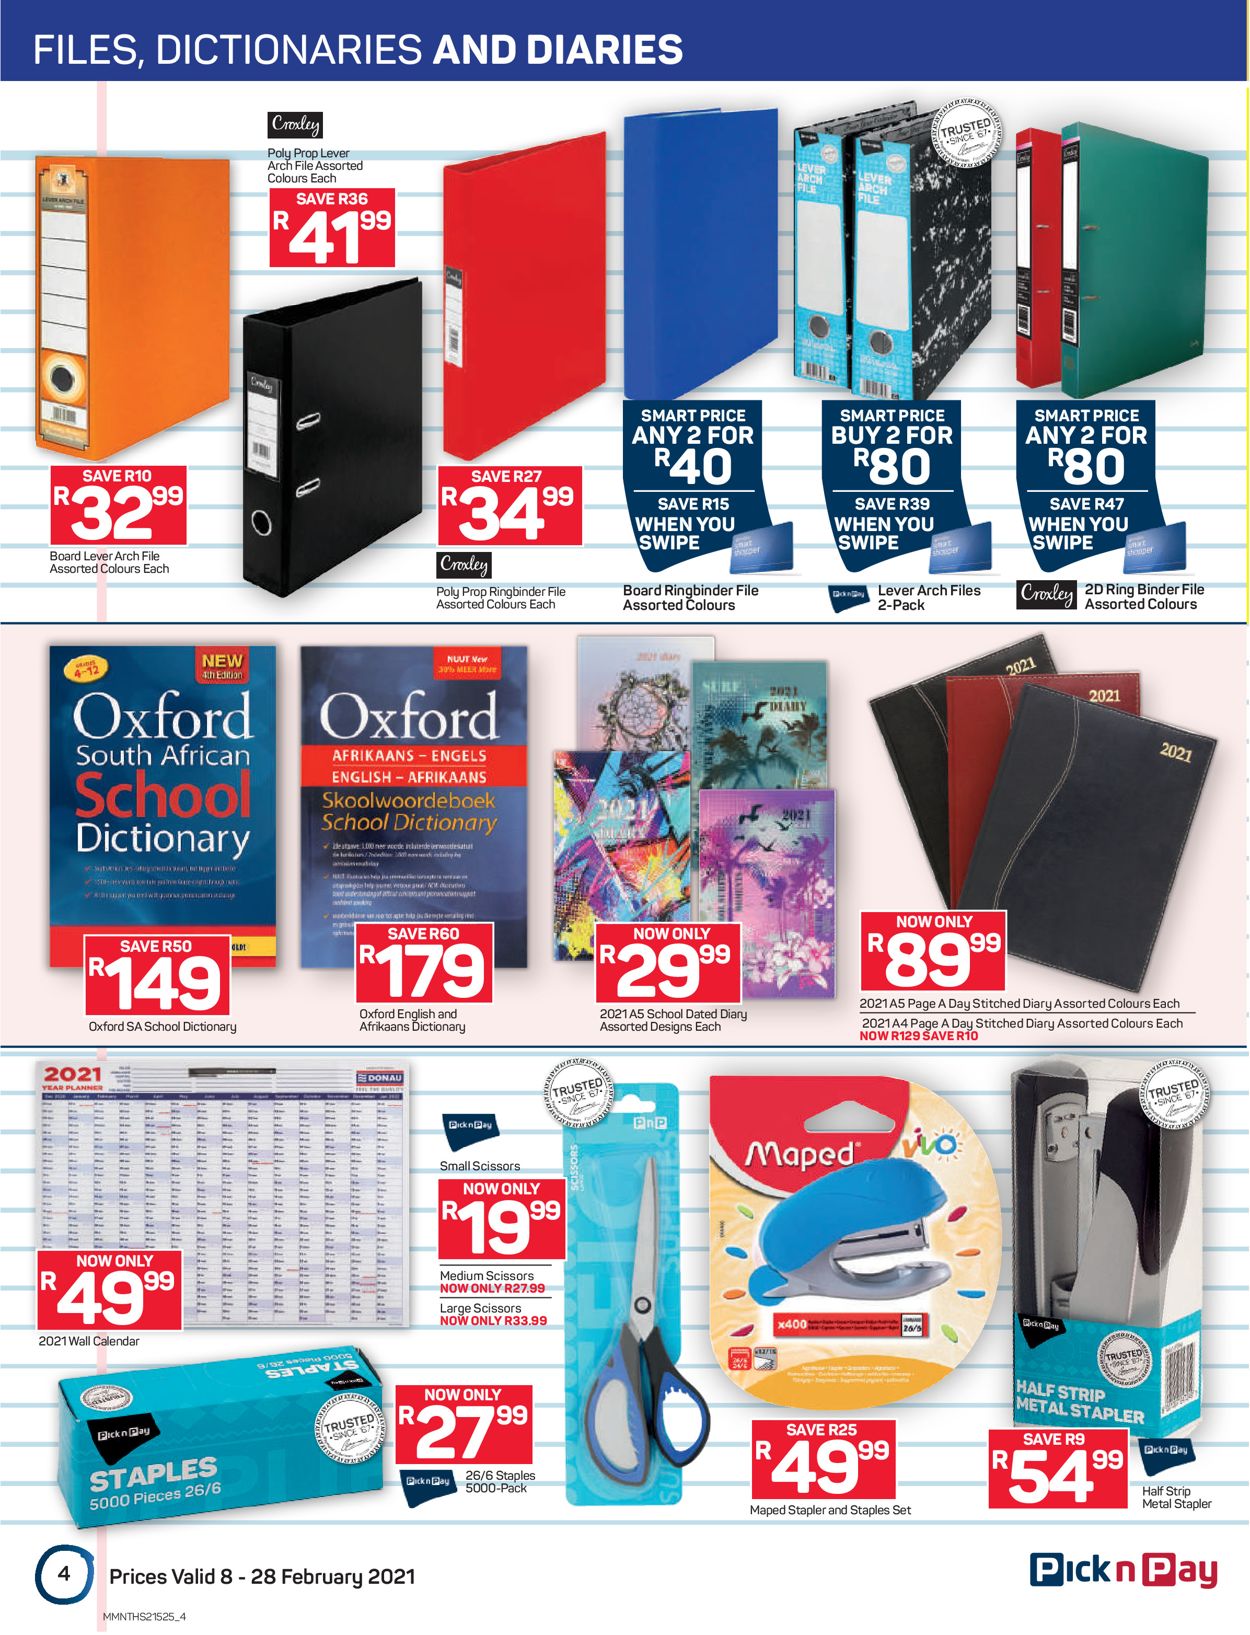 Pick n Pay Back to School 2021 Catalogue - 2021/02/08-2021/02/28 (Page 4)